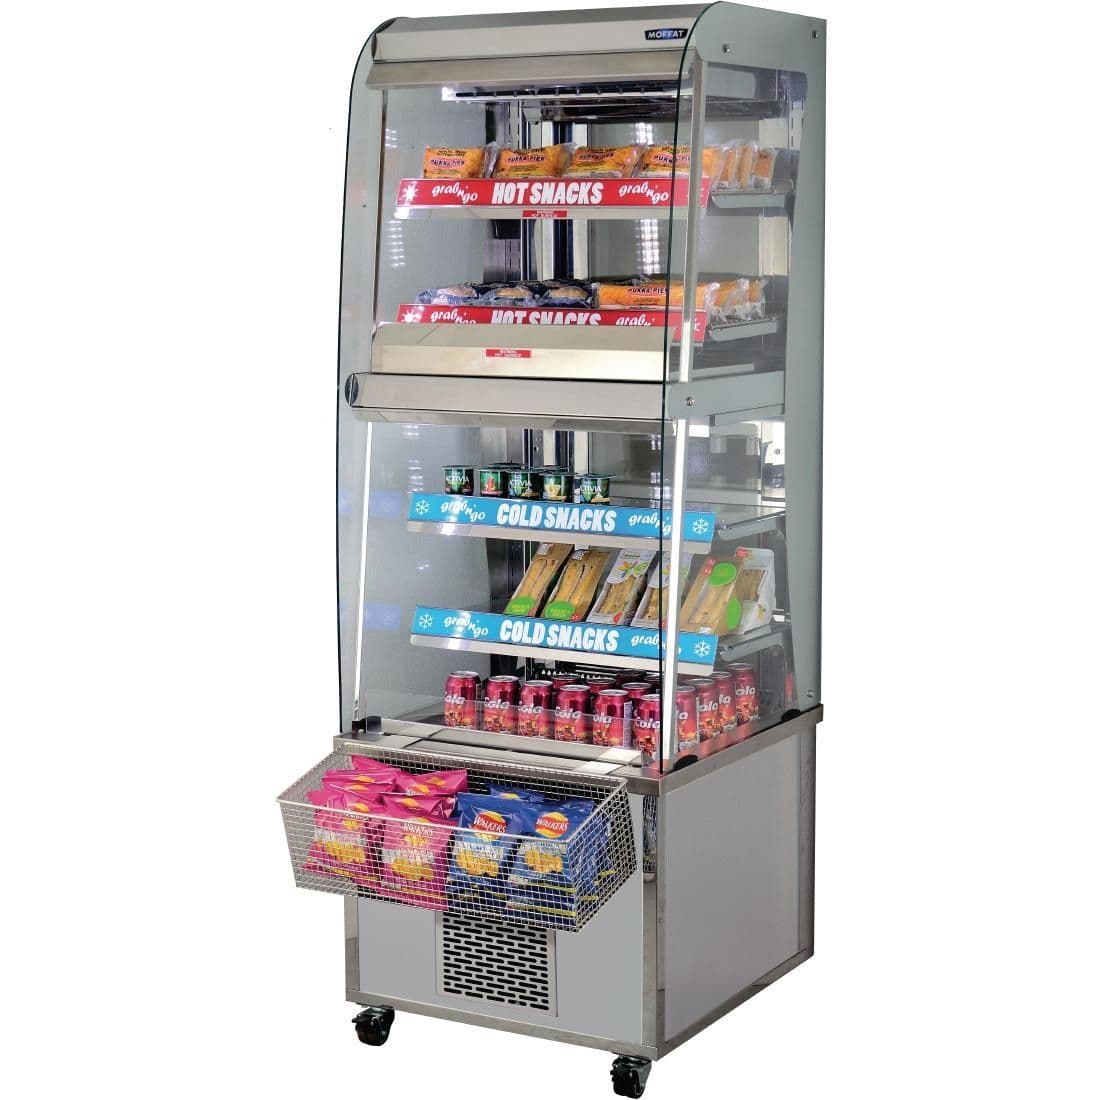 DR413 Moffat Hot and Cold Food Multideck Merchandiser MHC1 JD Catering Equipment Solutions Ltd